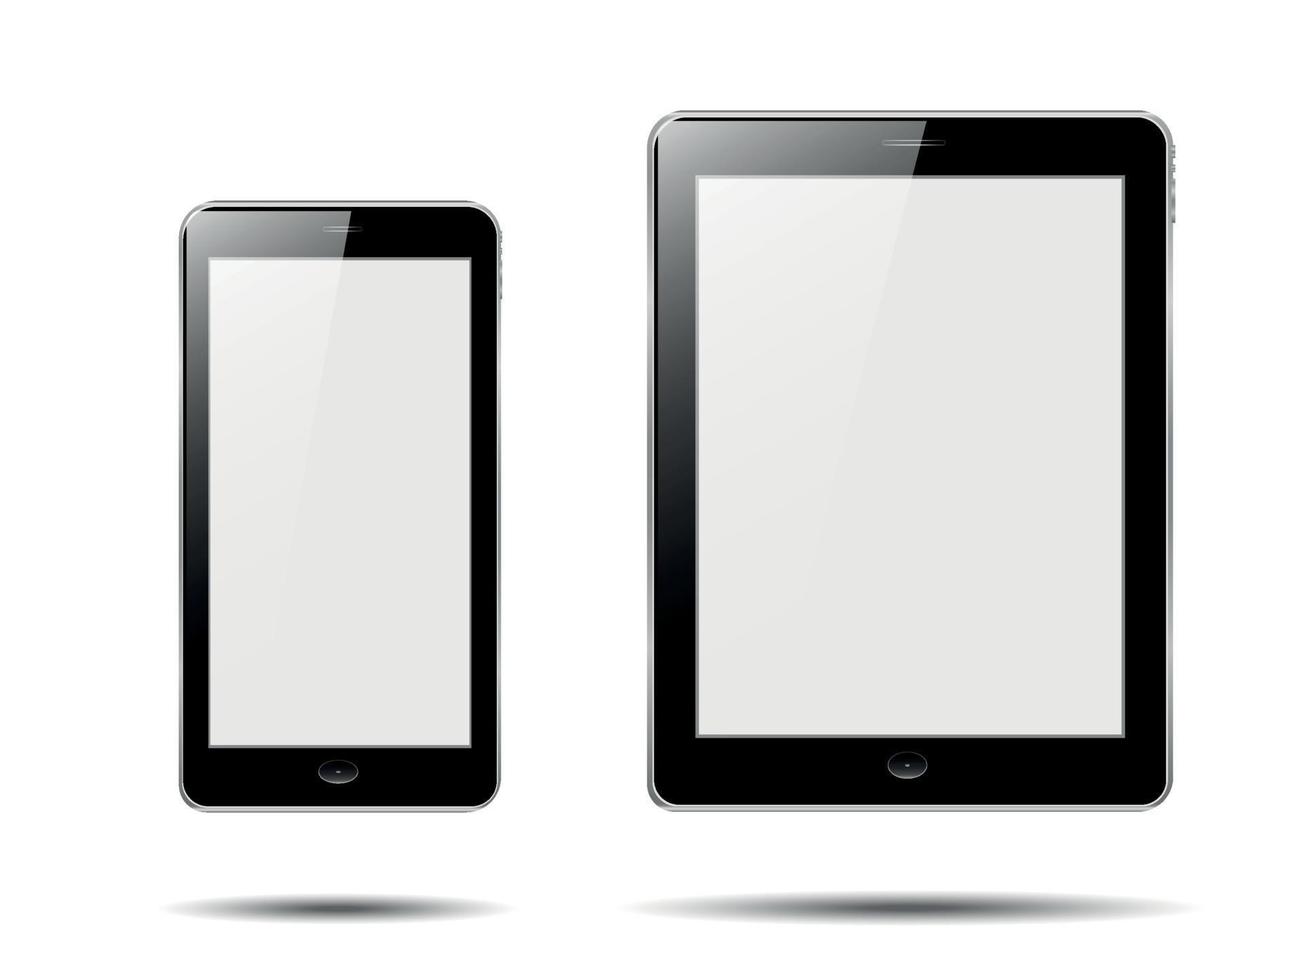 Realistic tablet pc mock up with blank screen. tablet and realistic smartphone mockup isolated on white background. tablet different angles views. Vector illustration